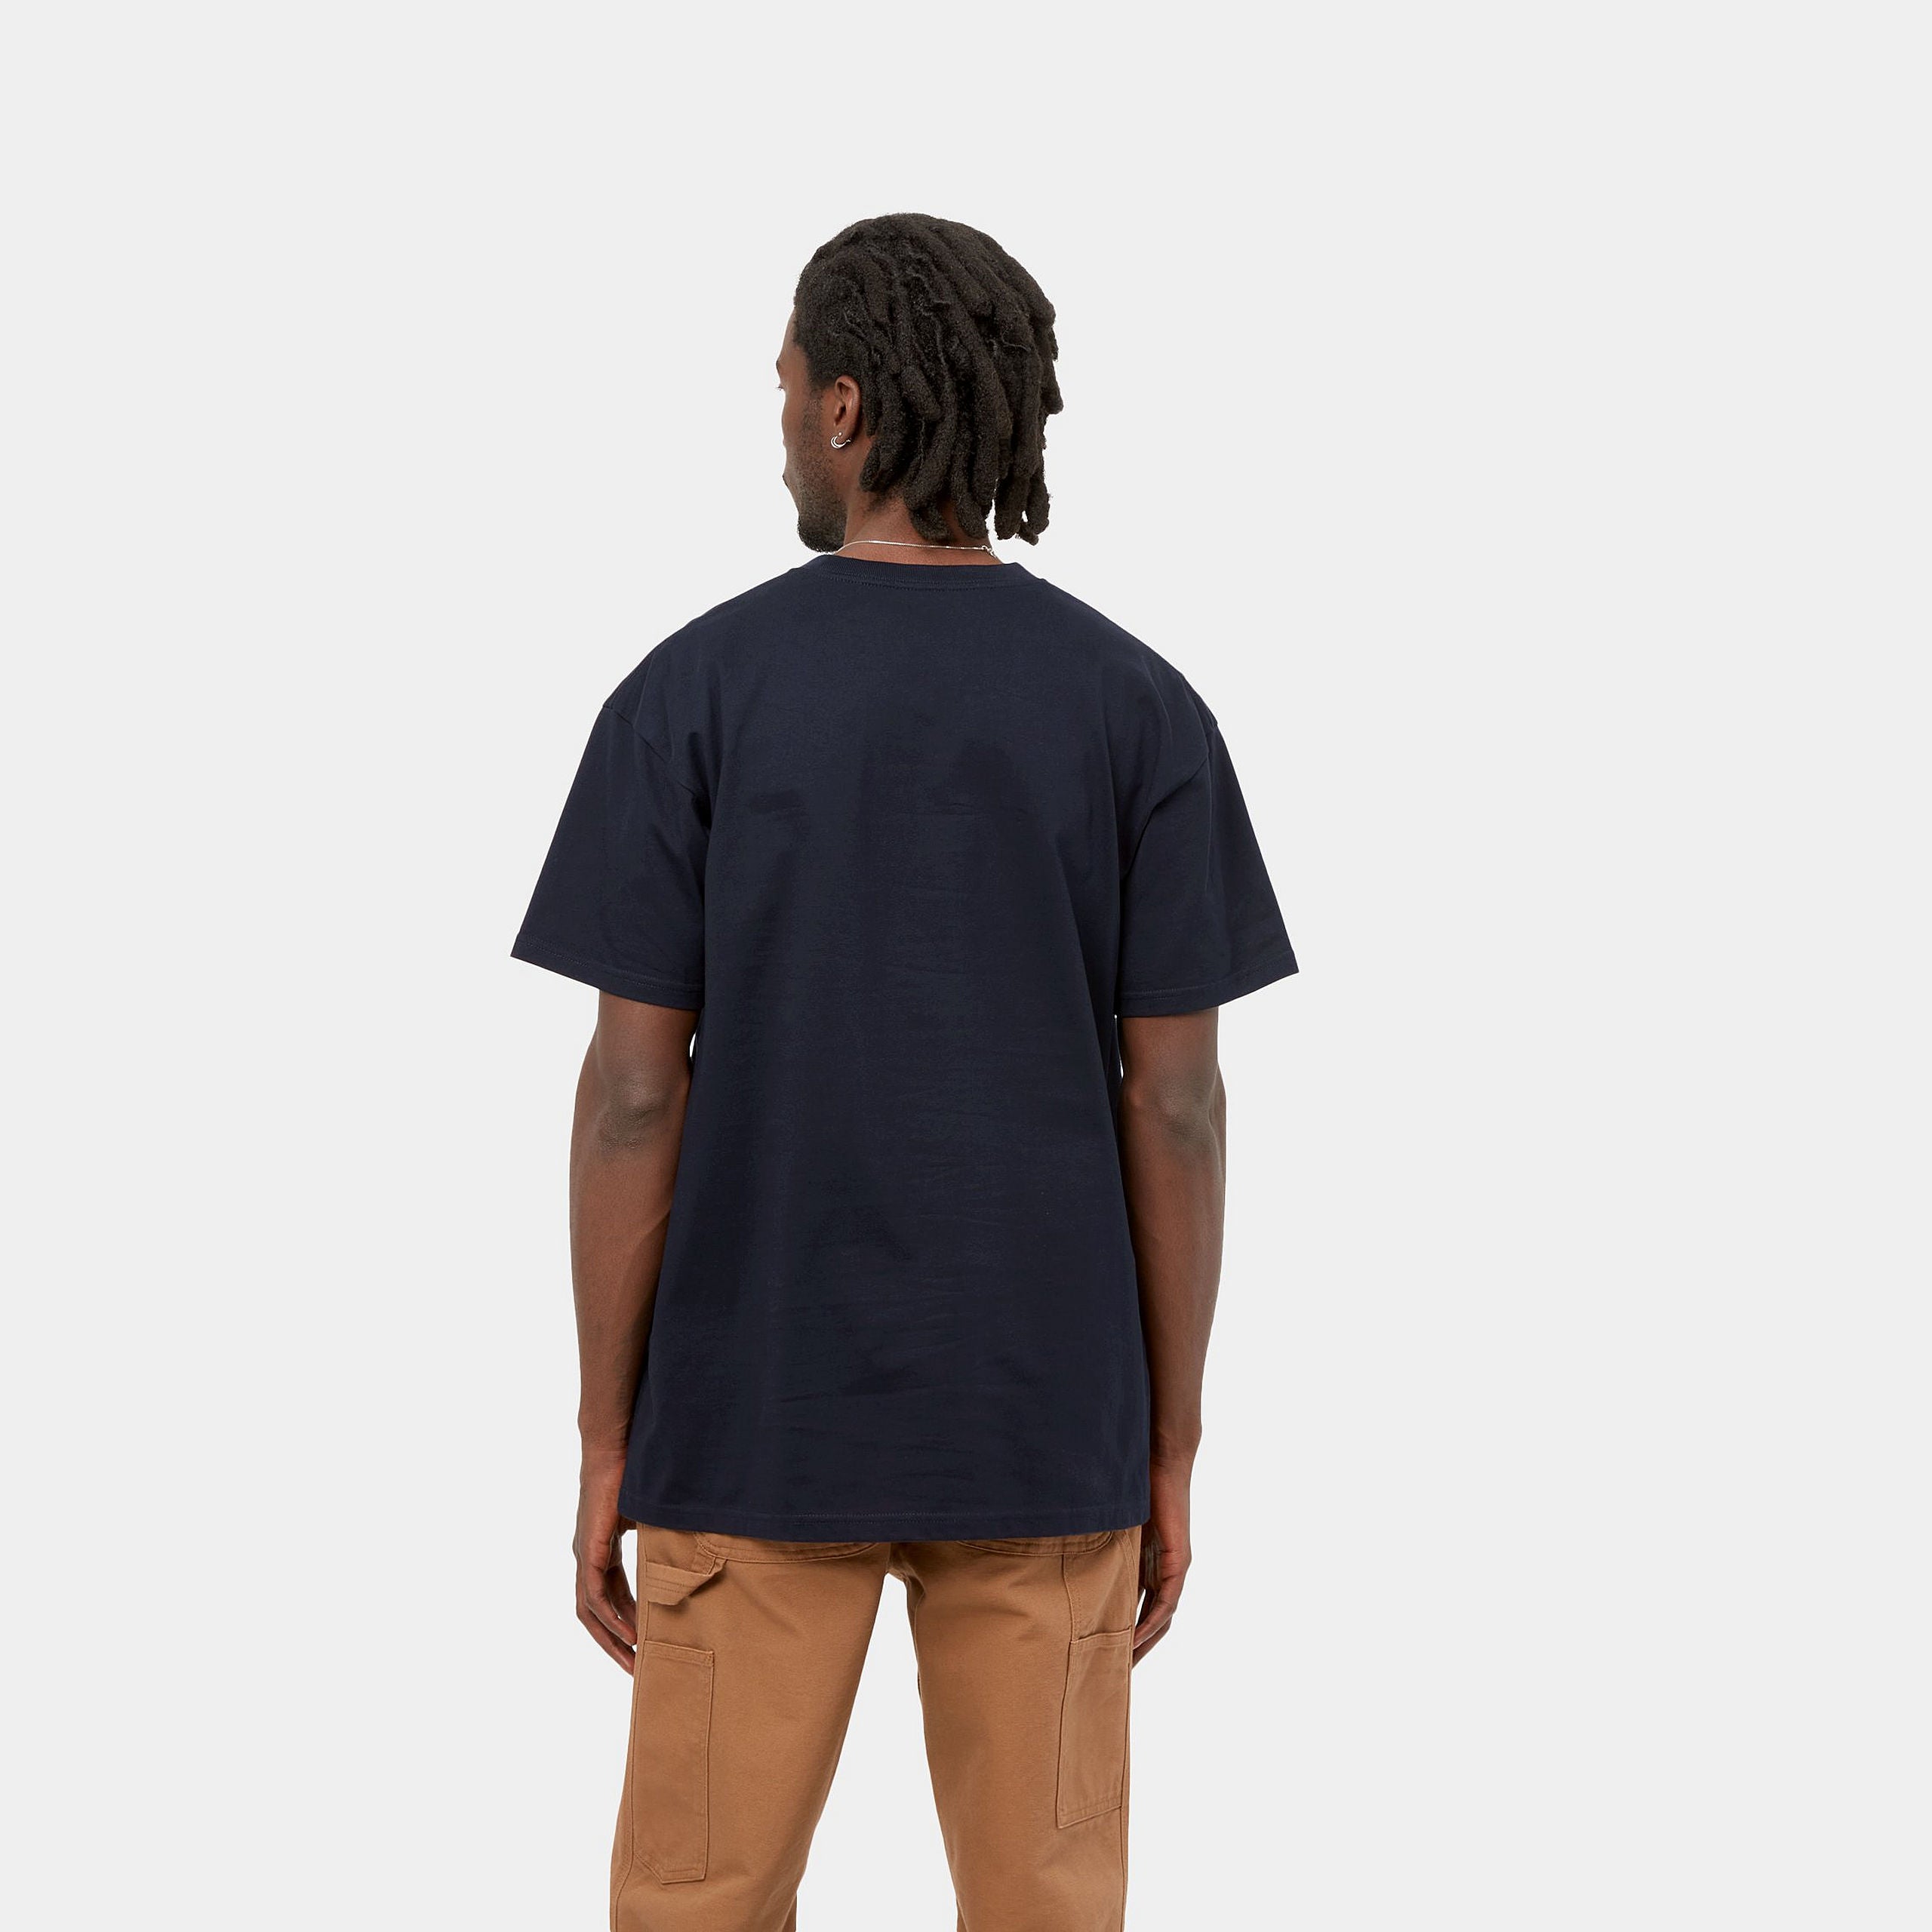 S/S Chase T-Shirt-Dark Navy / Gold - Rear View